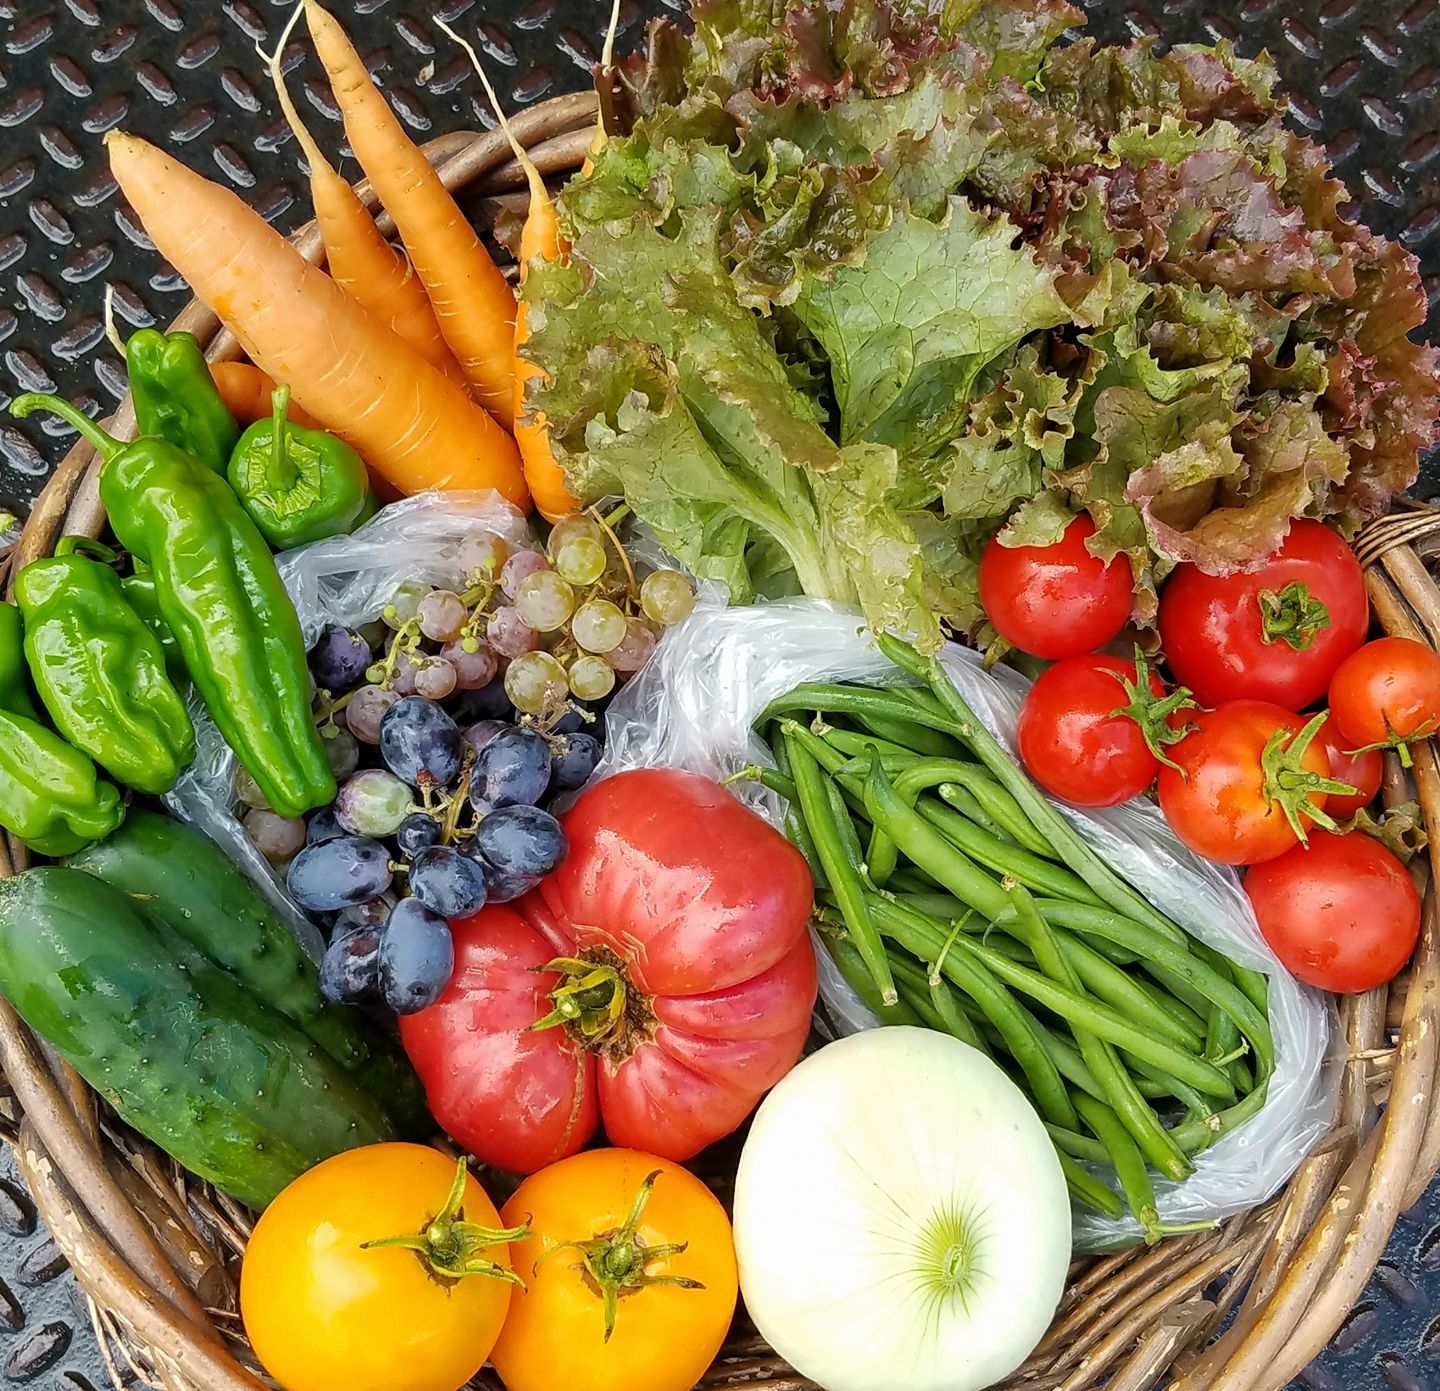 A basket full of peppers, tomatoes, grapes, and other veggies.